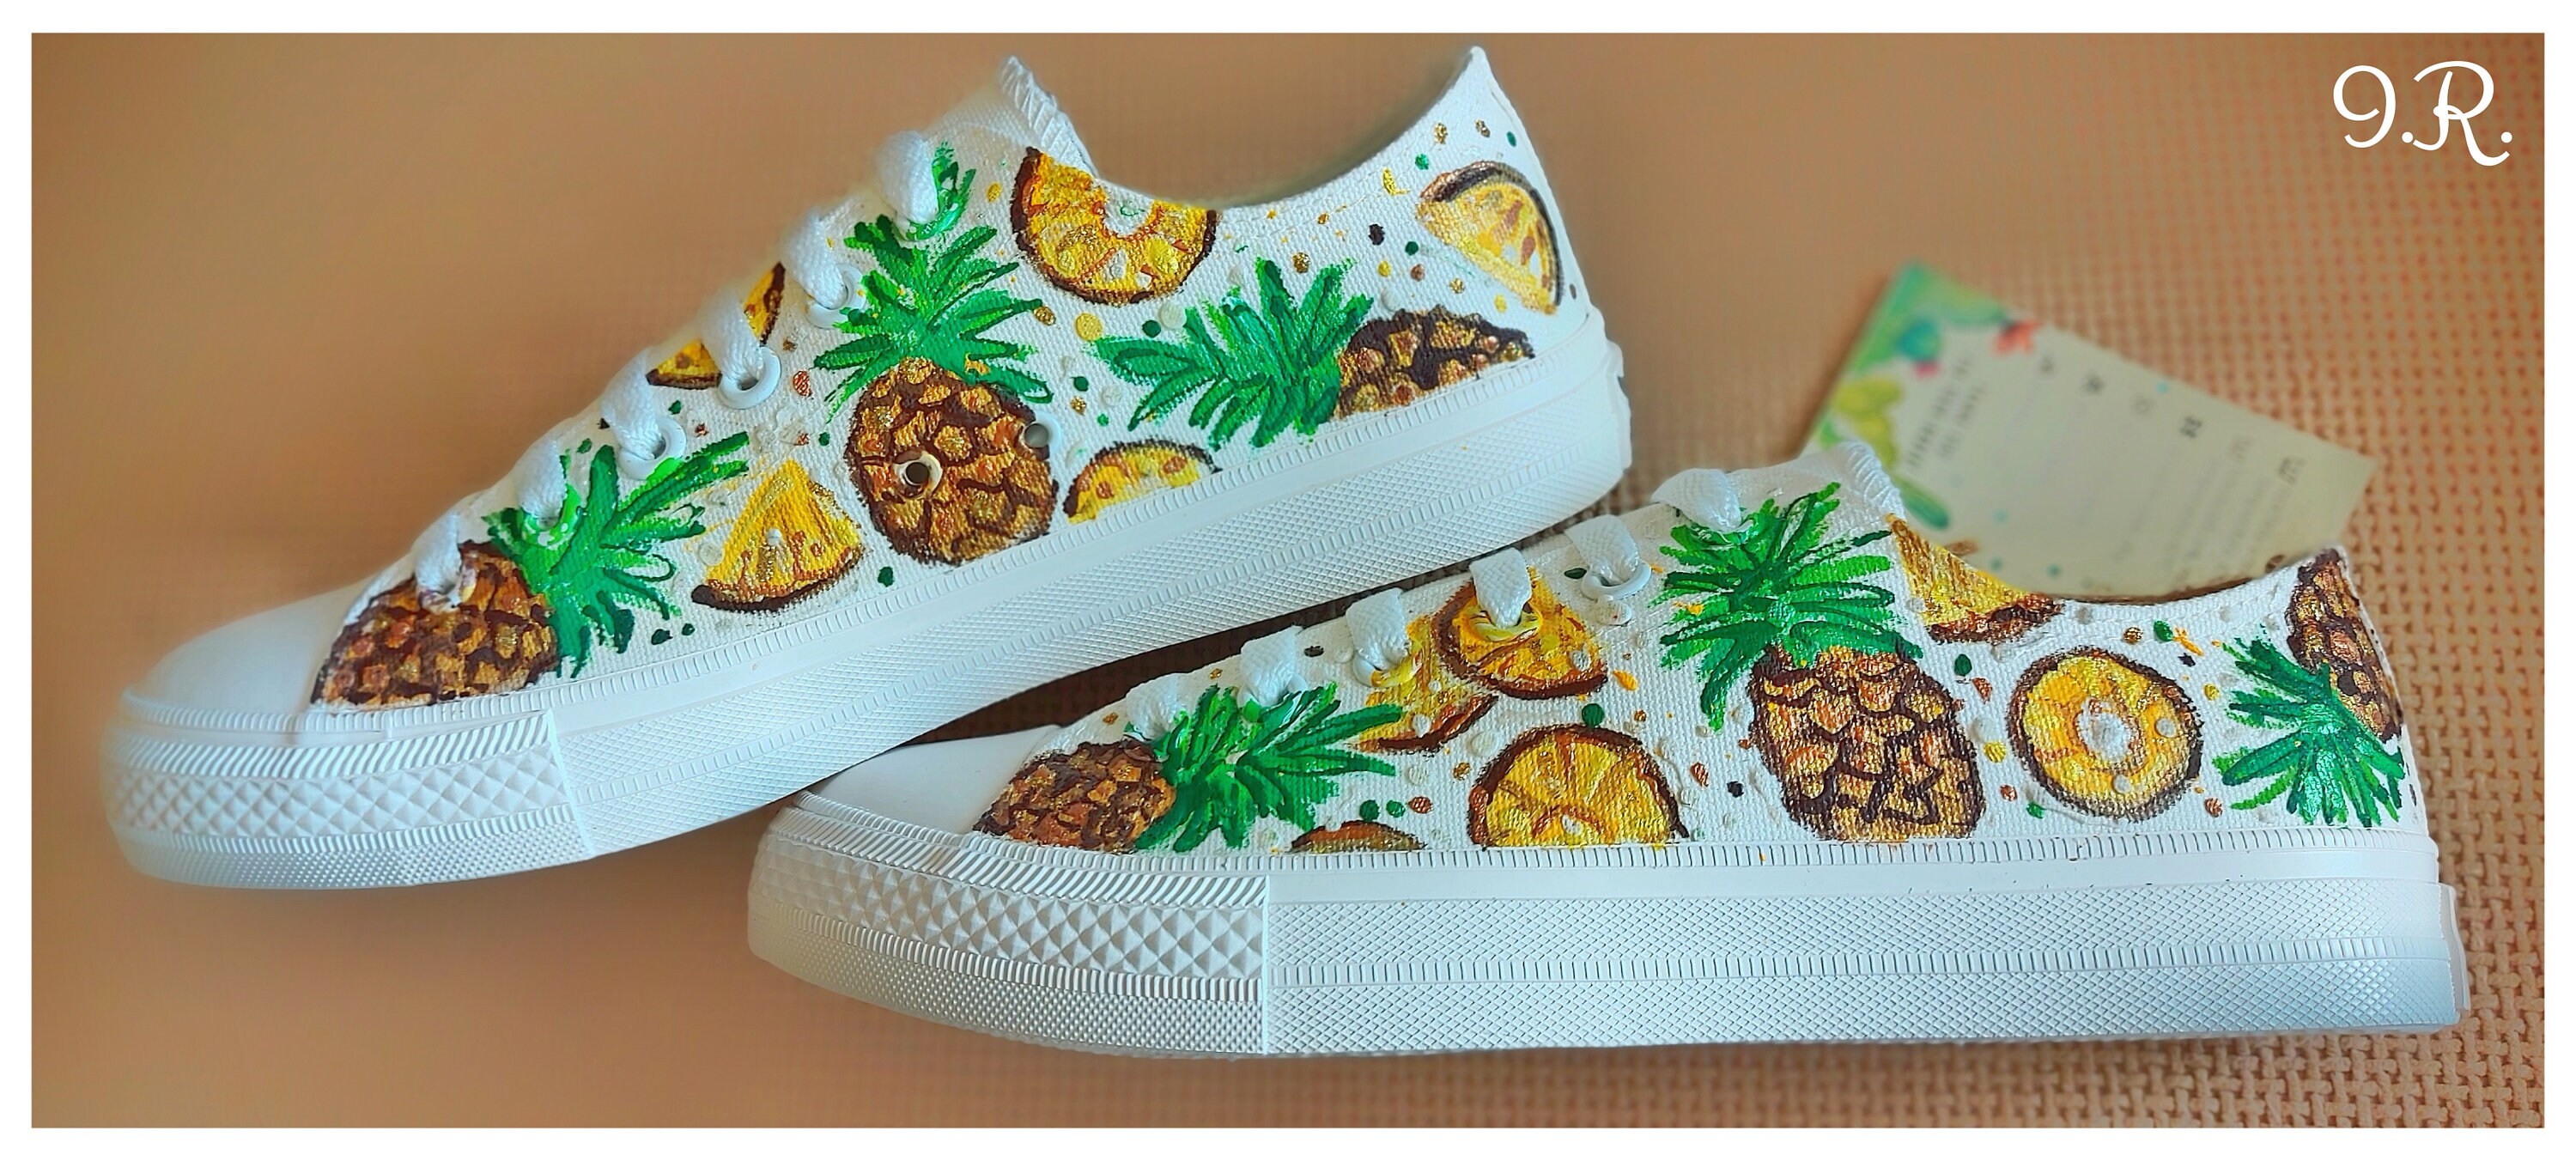 Pineapples Sneakers Hand-painted Shoes Pineapples Shoes - Etsy